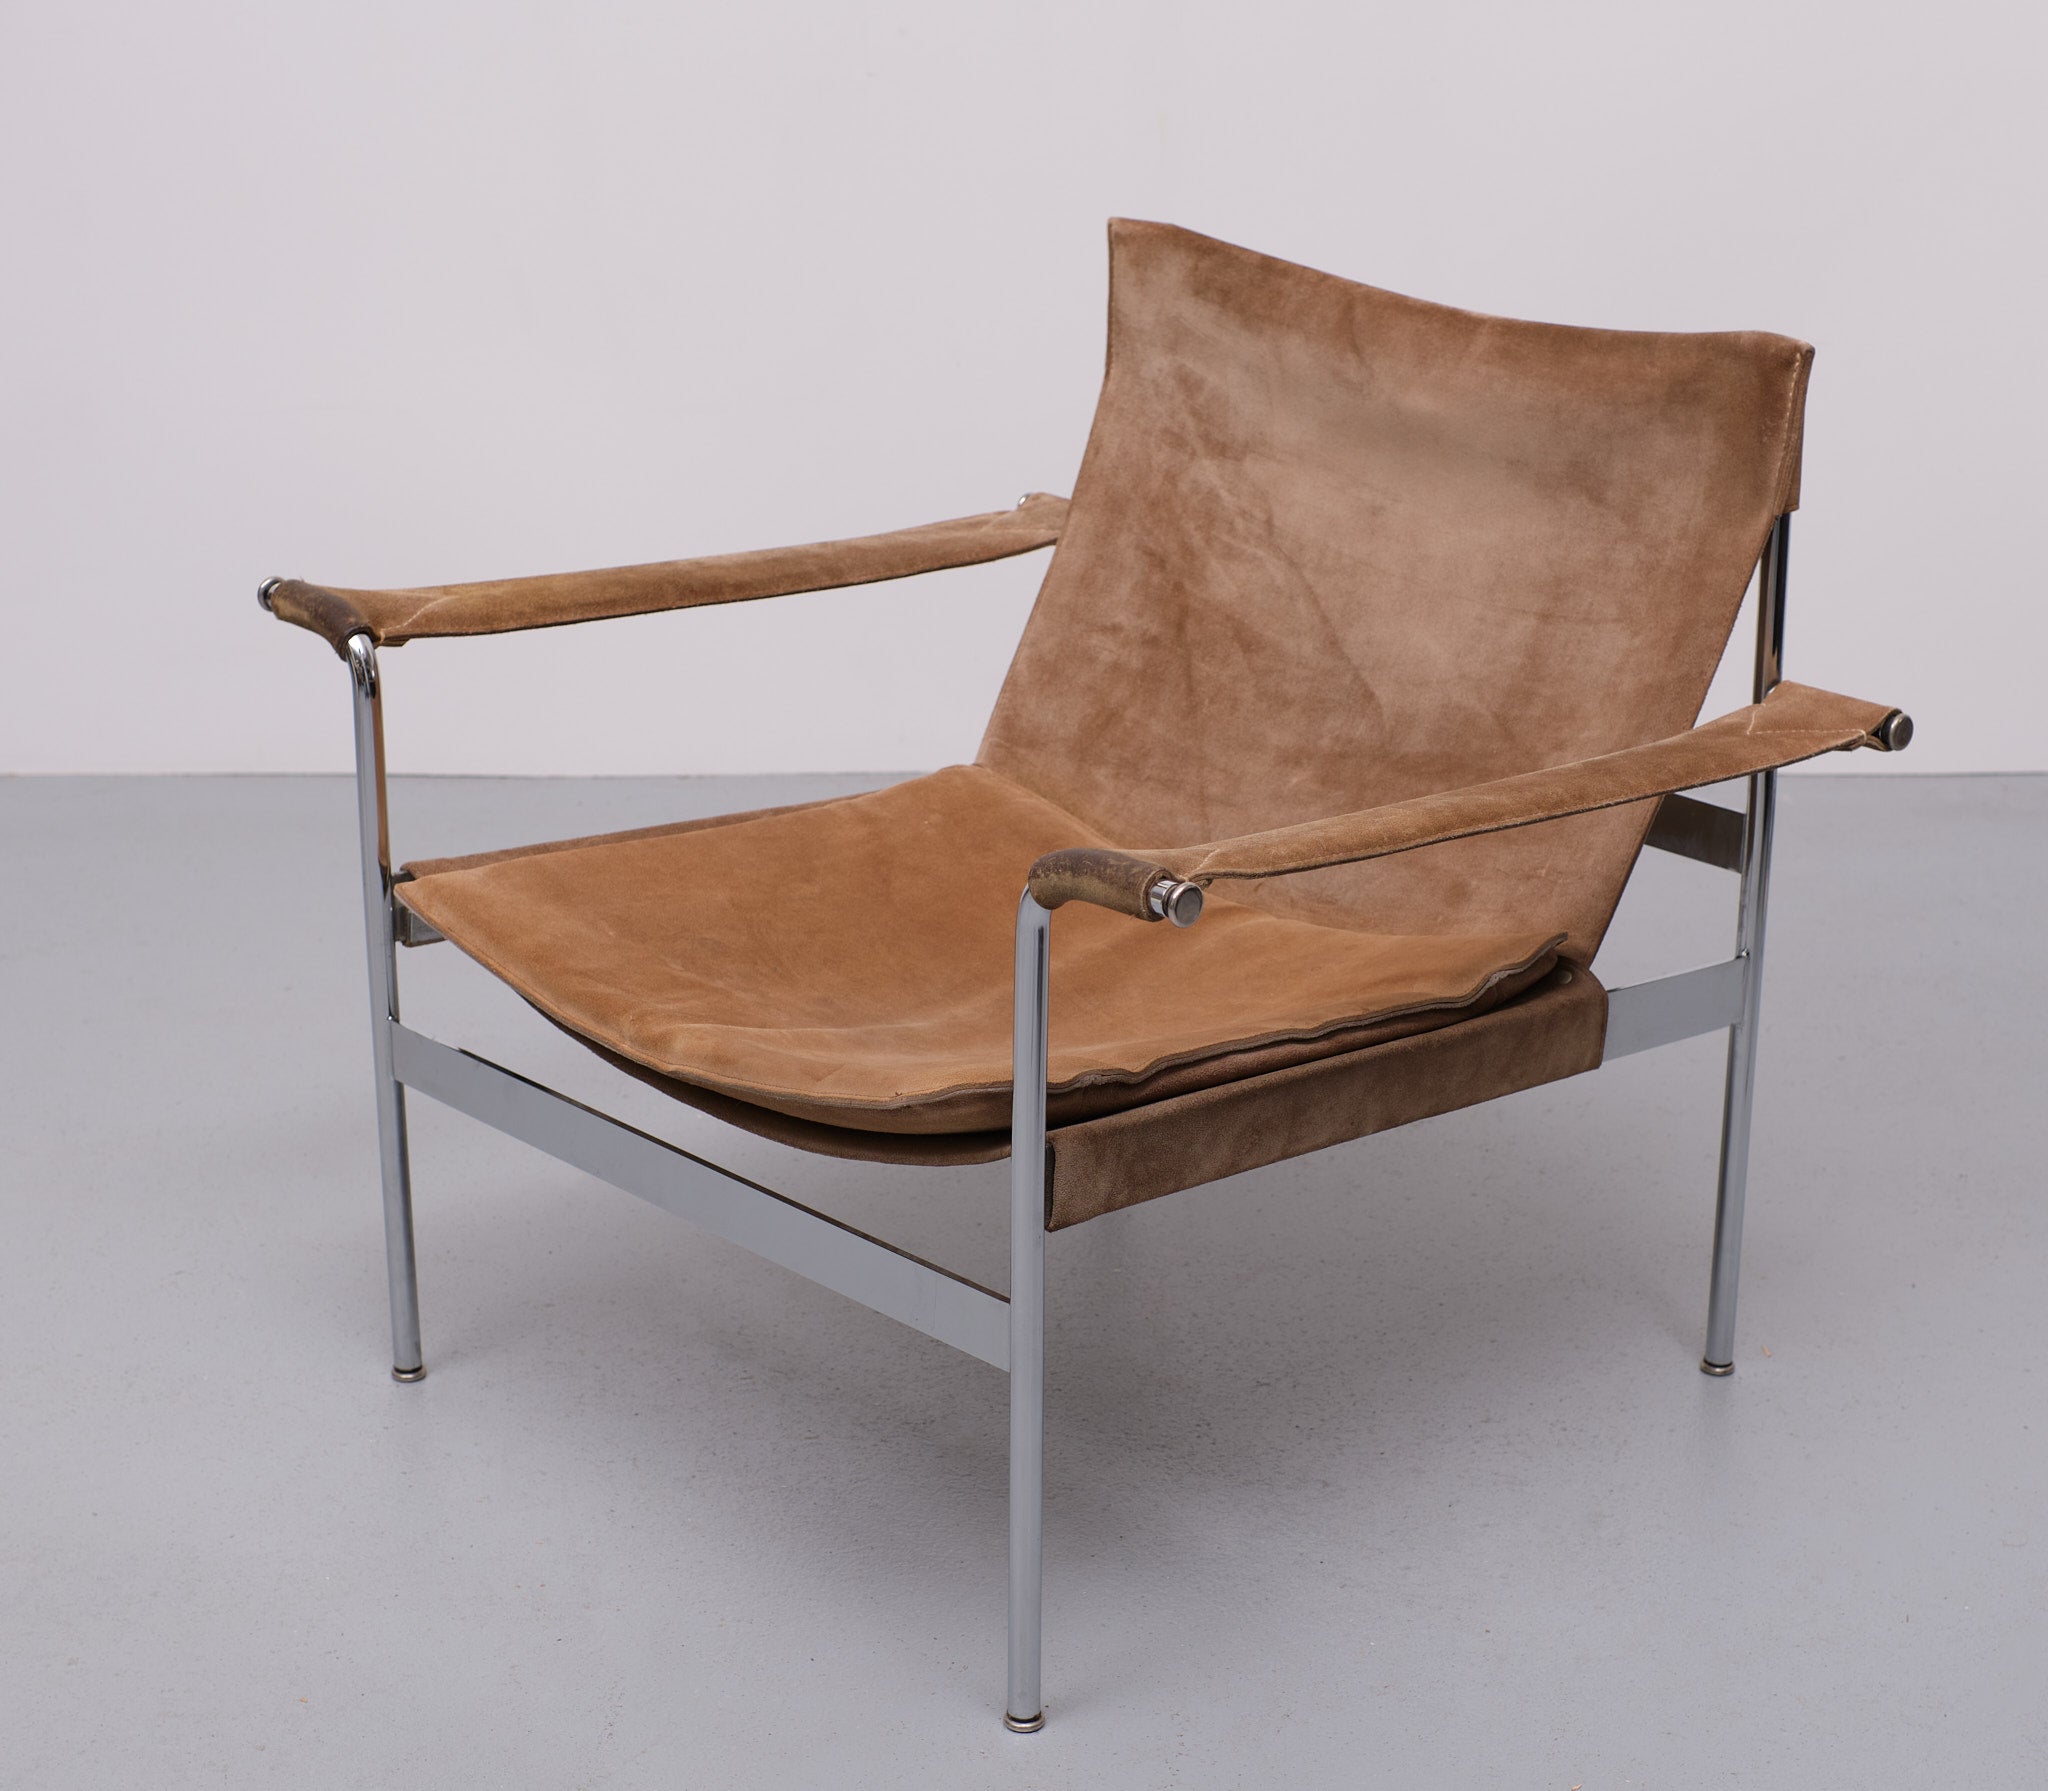 Very nice Suede Leather lounge chair Design by Hans könecke for Tecta 1970s 
Good condition. With just the right amount off patine. Beautiful chair with a nice 
warm Sand color.

